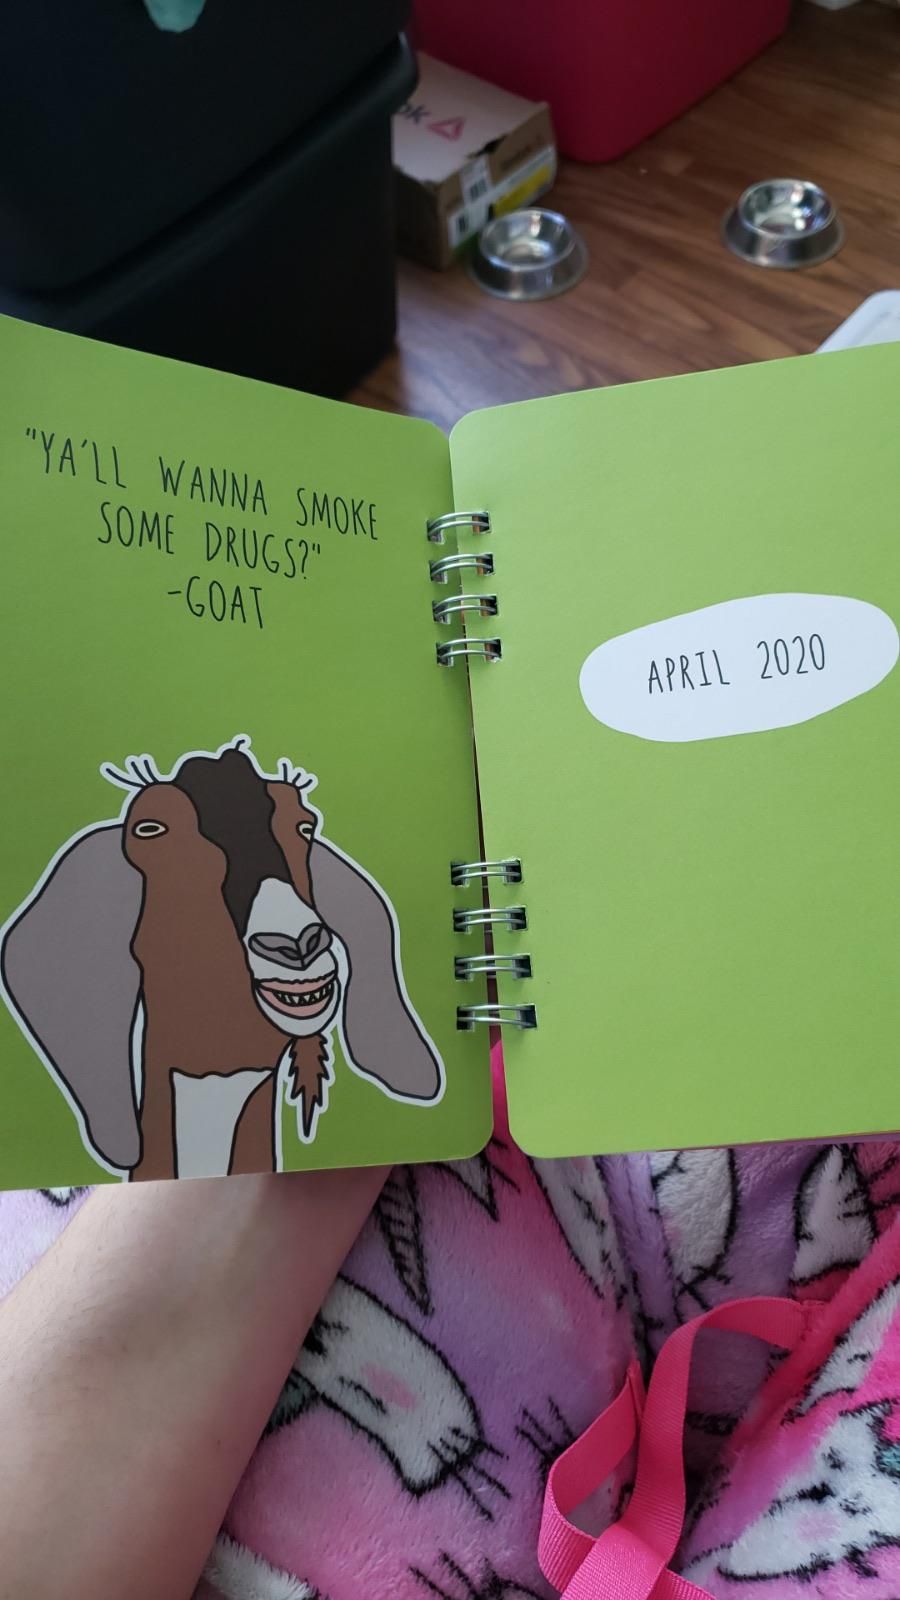 My wife bought our 10 year old daughter a new planner for school. She should have browsed through it before letting her take it to school.